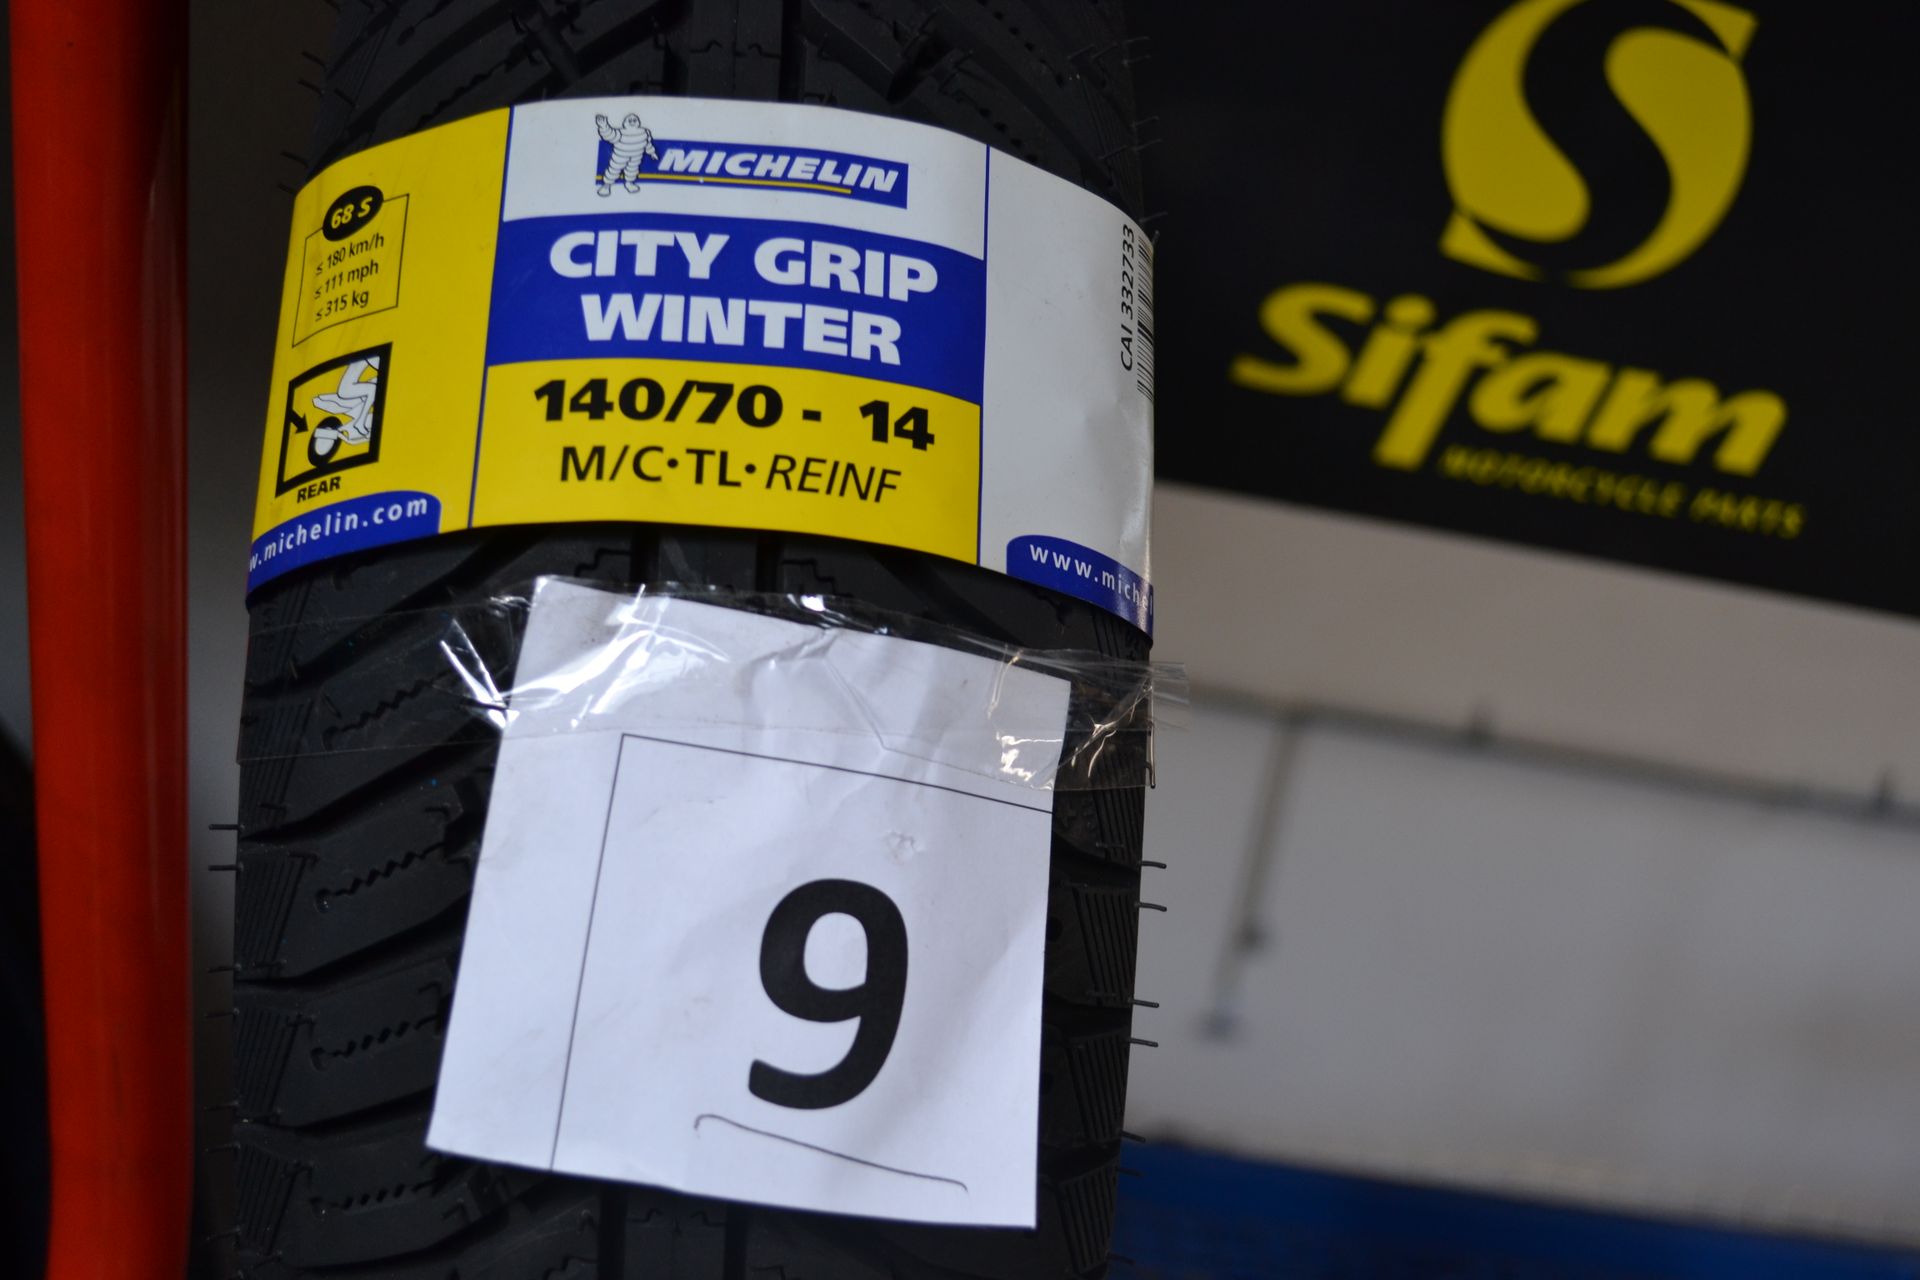 Null MICHELIN CITY GRIP WINTER 140*70*R14 tire, year of manufacture 2019